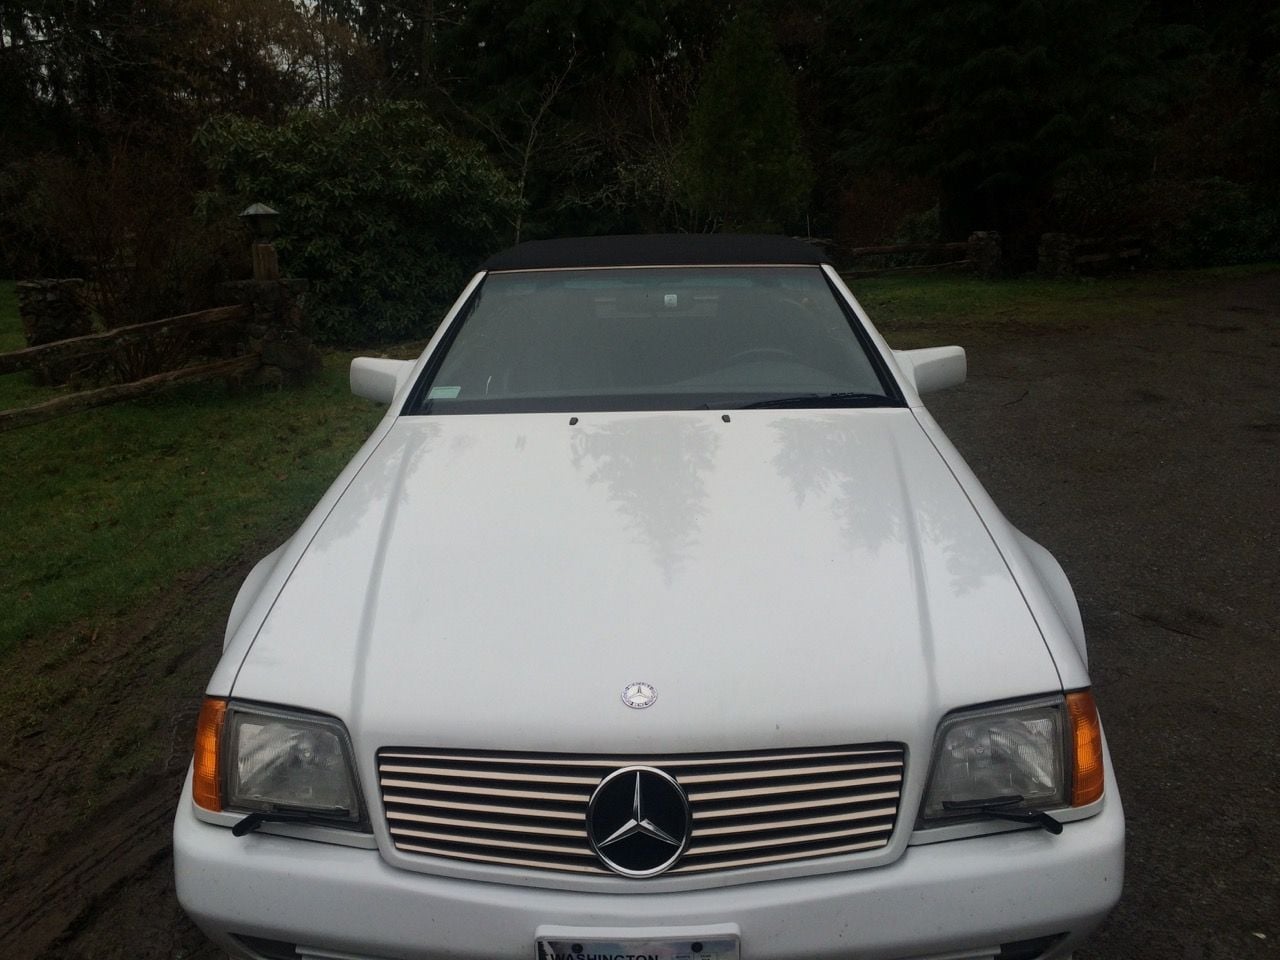 1992 Mercedes-Benz 500SL - Classic 1992 Mercedes 500 SL Roadster - Used - VIN WDBFA66E5NF039778 - 8 cyl - 2WD - Automatic - Convertible - White - Langley, WA 98260, United States